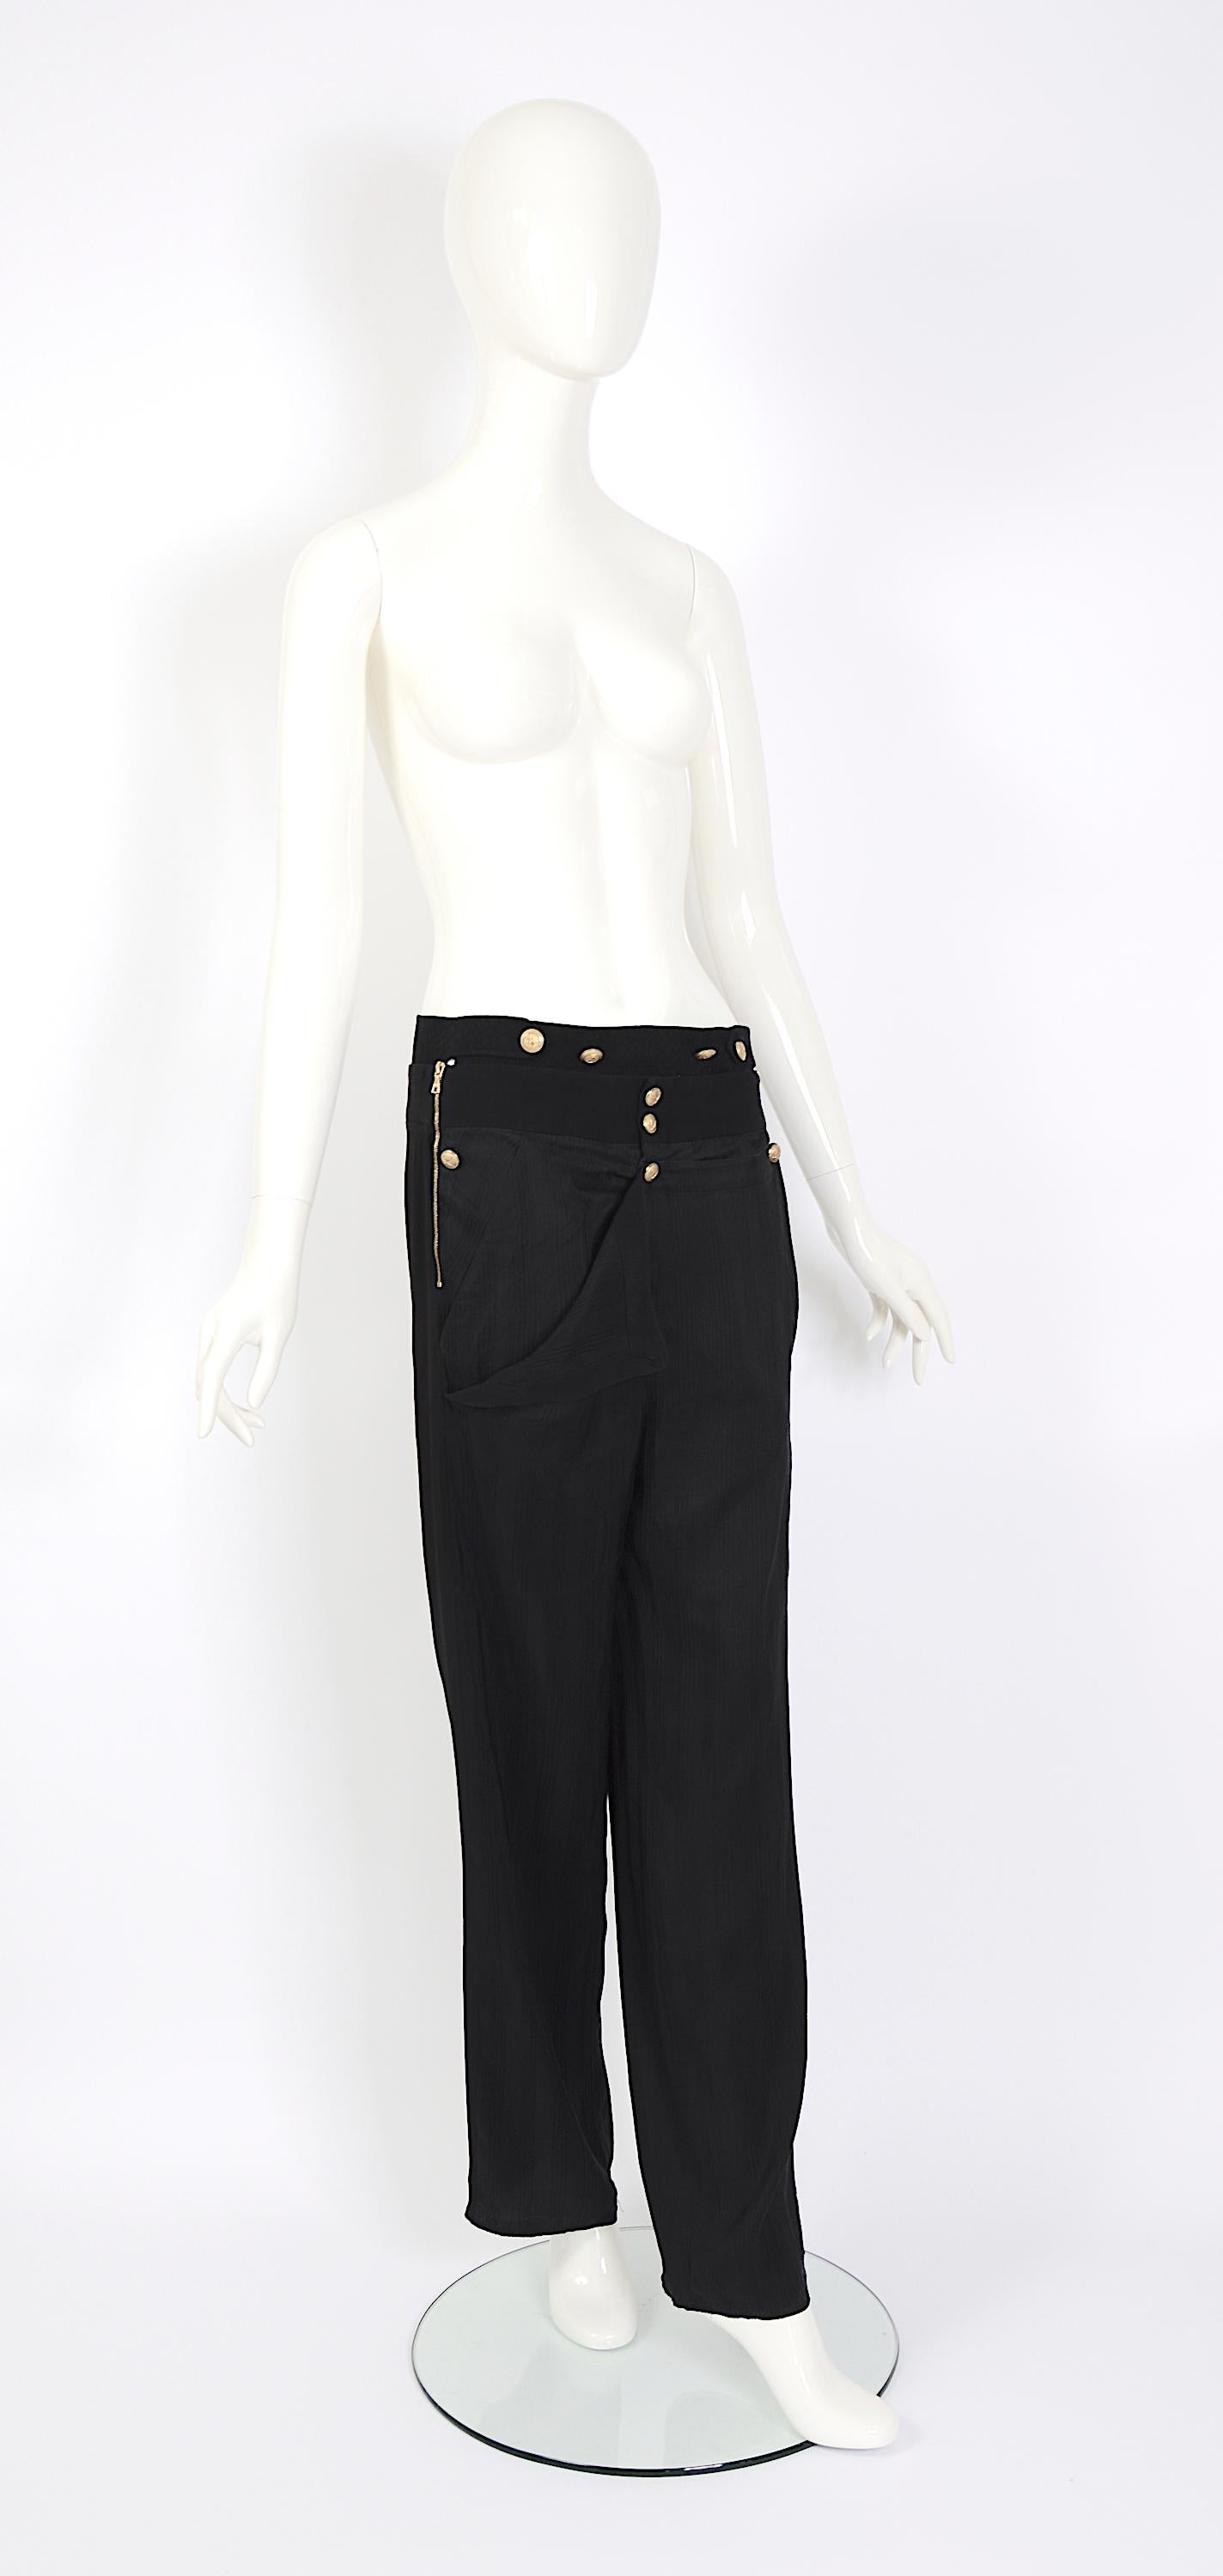 Iconique and very collectible Balenciaga by Nicolas Ghesquière SS 2005 runway black silk military brass buttons pants.
French size 38
Styled to perfection, these trousers exude an effortless allure. They were designed to be worn with a slight